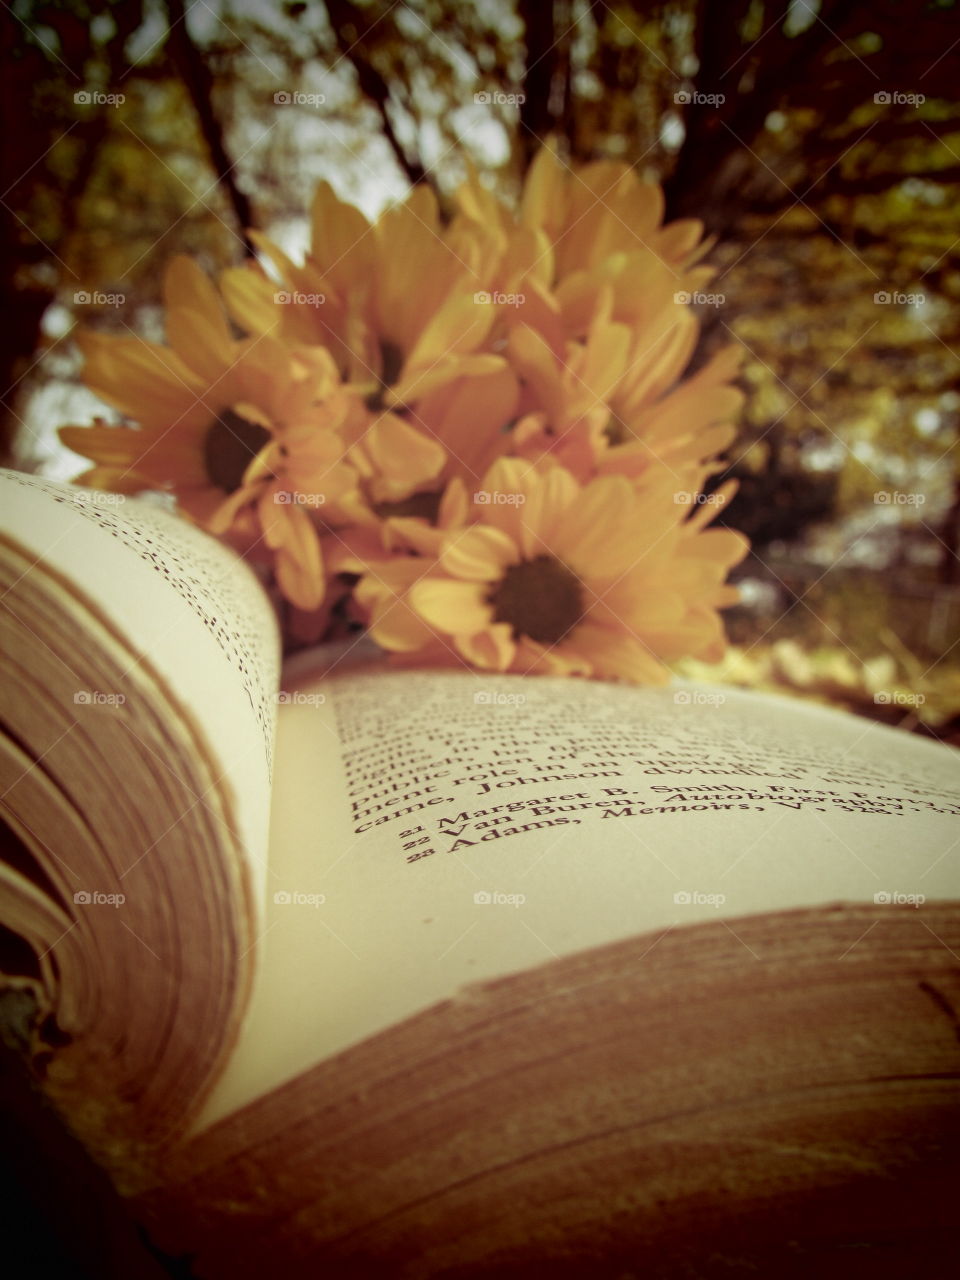 Daffodils on a old book